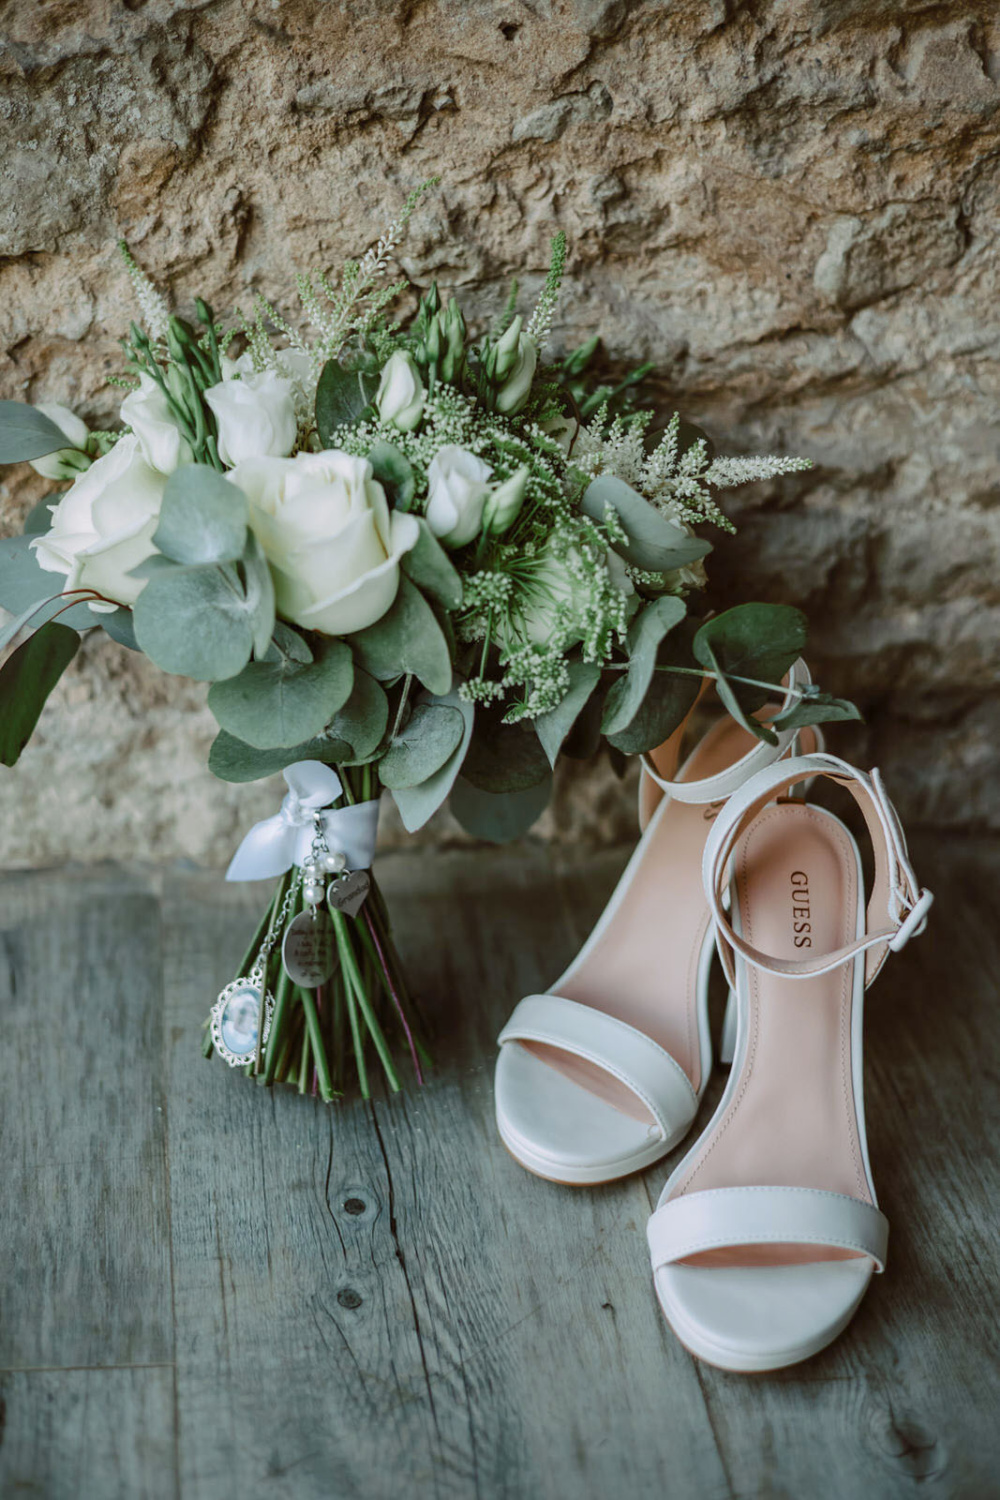 White wedding shoes and bouquet on a wooden table.